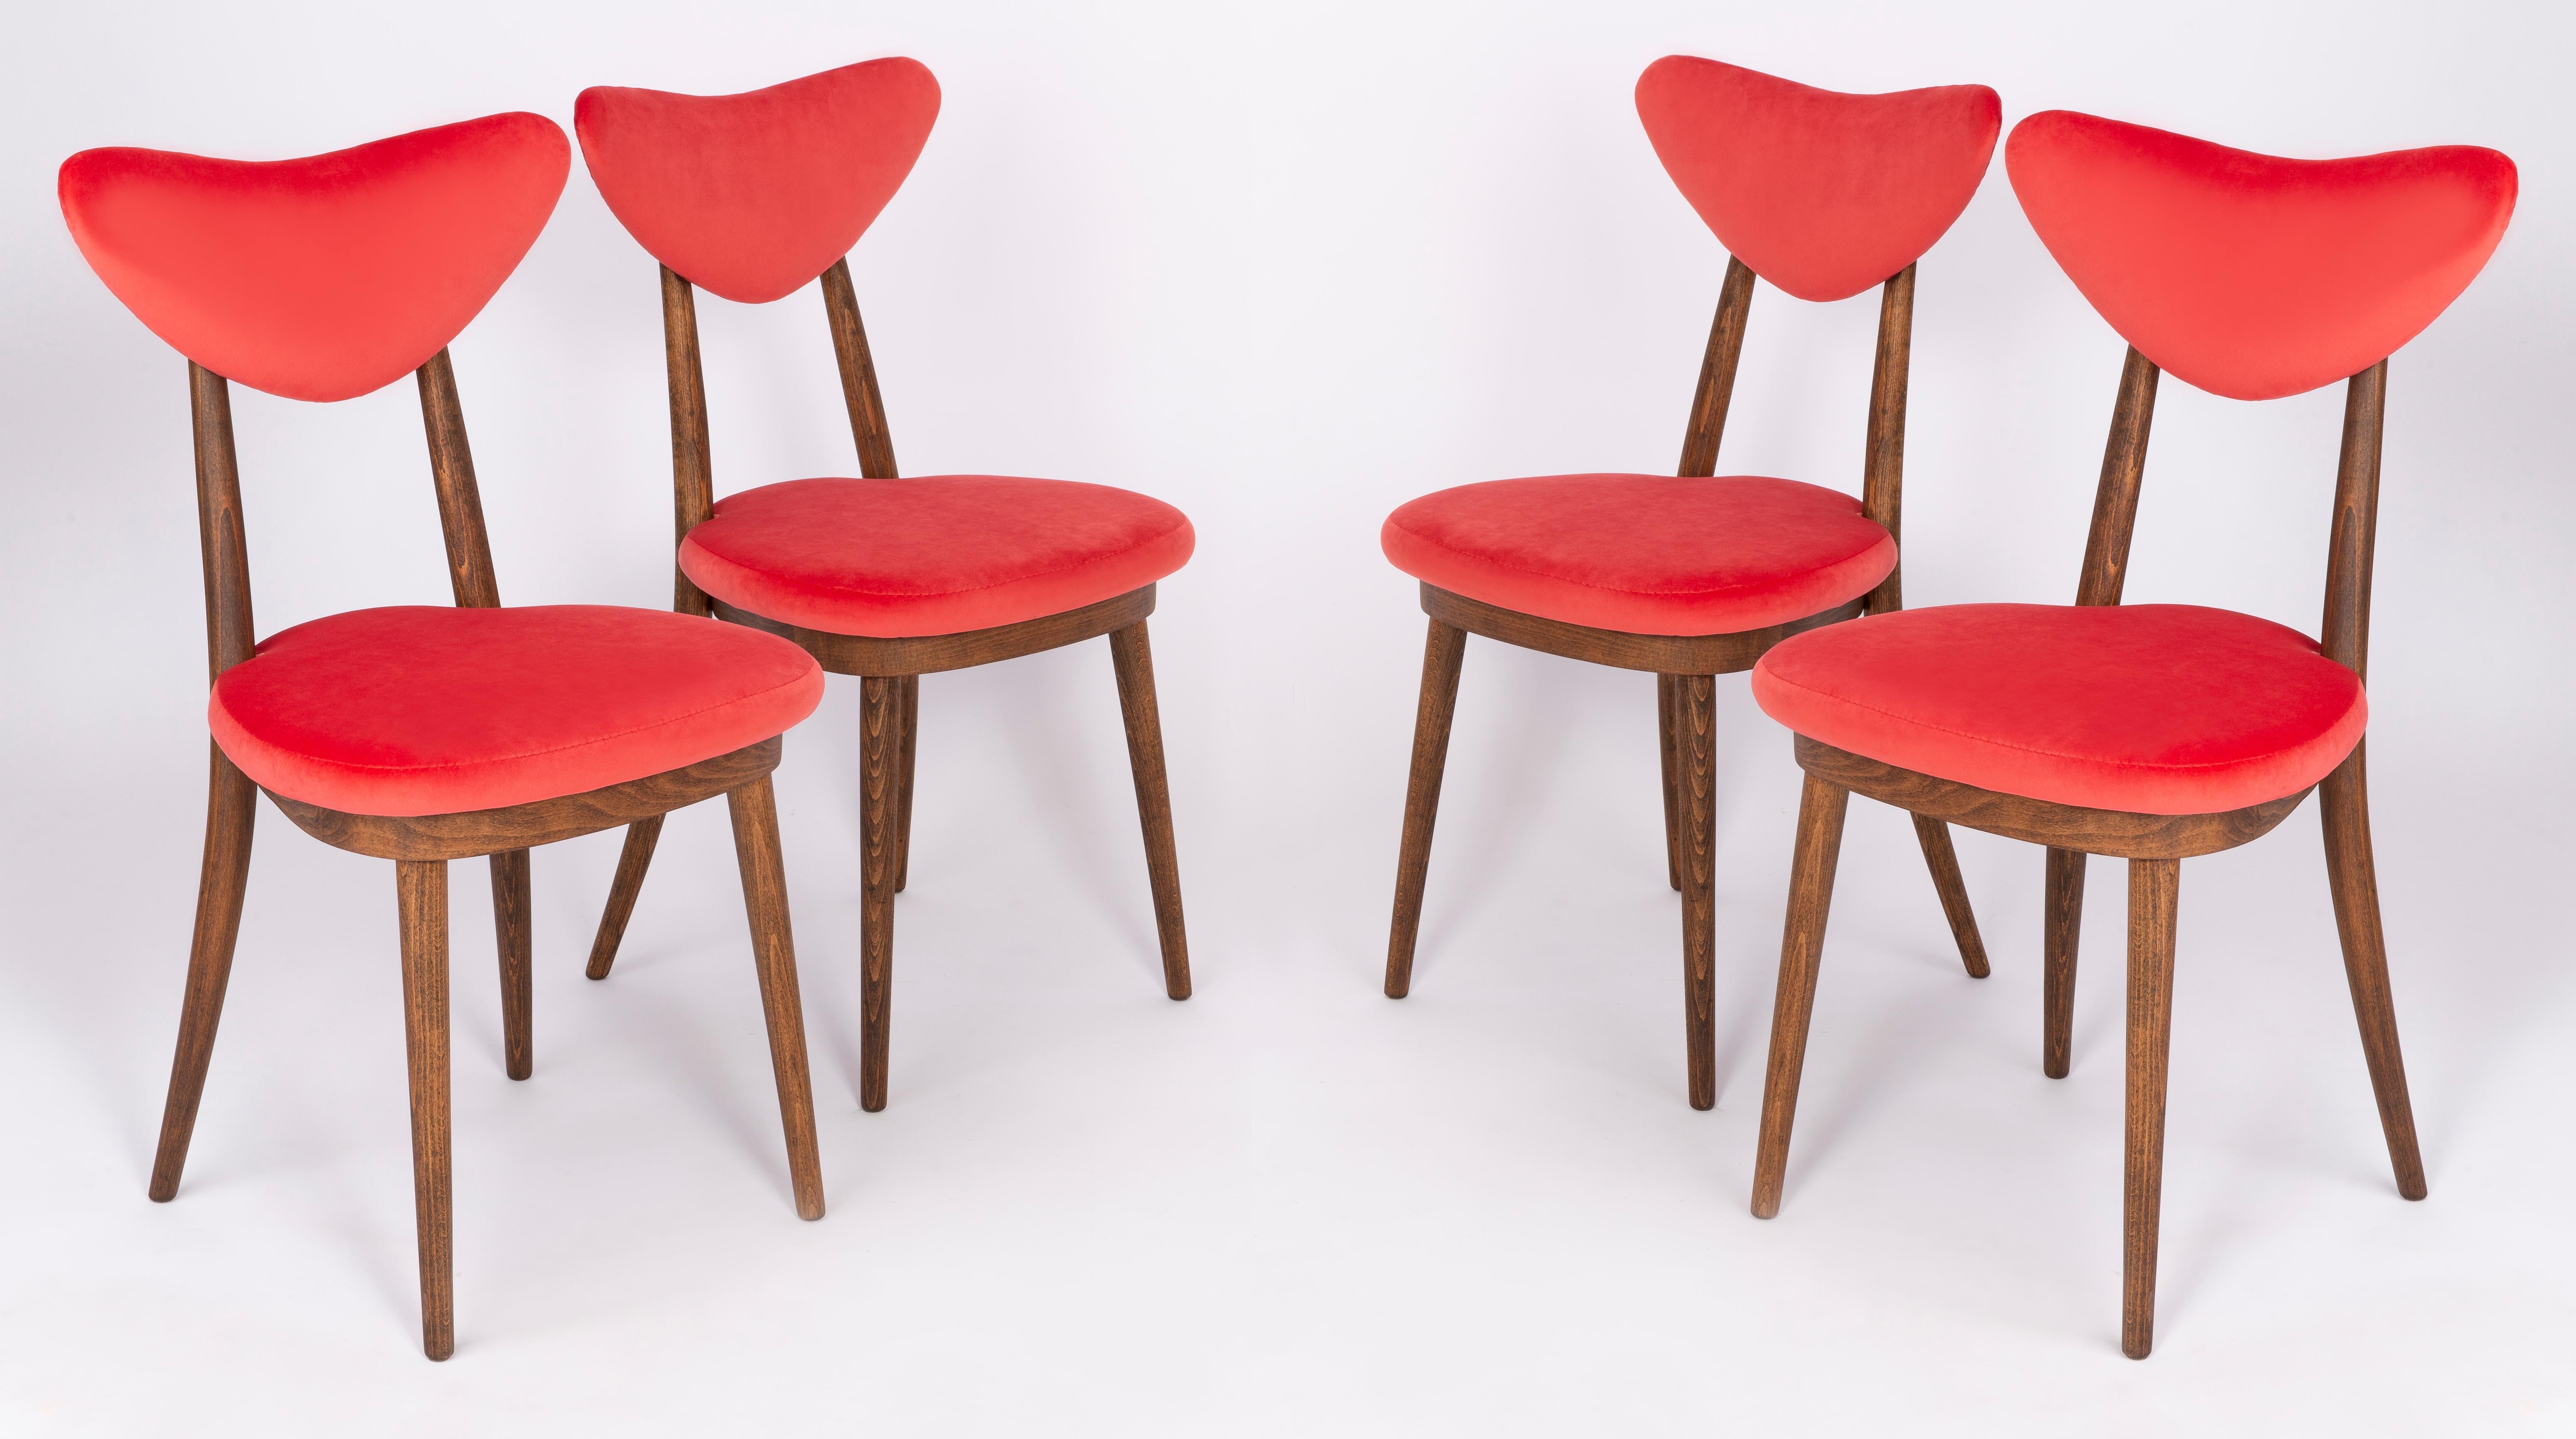 A set of 4 chairs type A5828. Colloquially called 